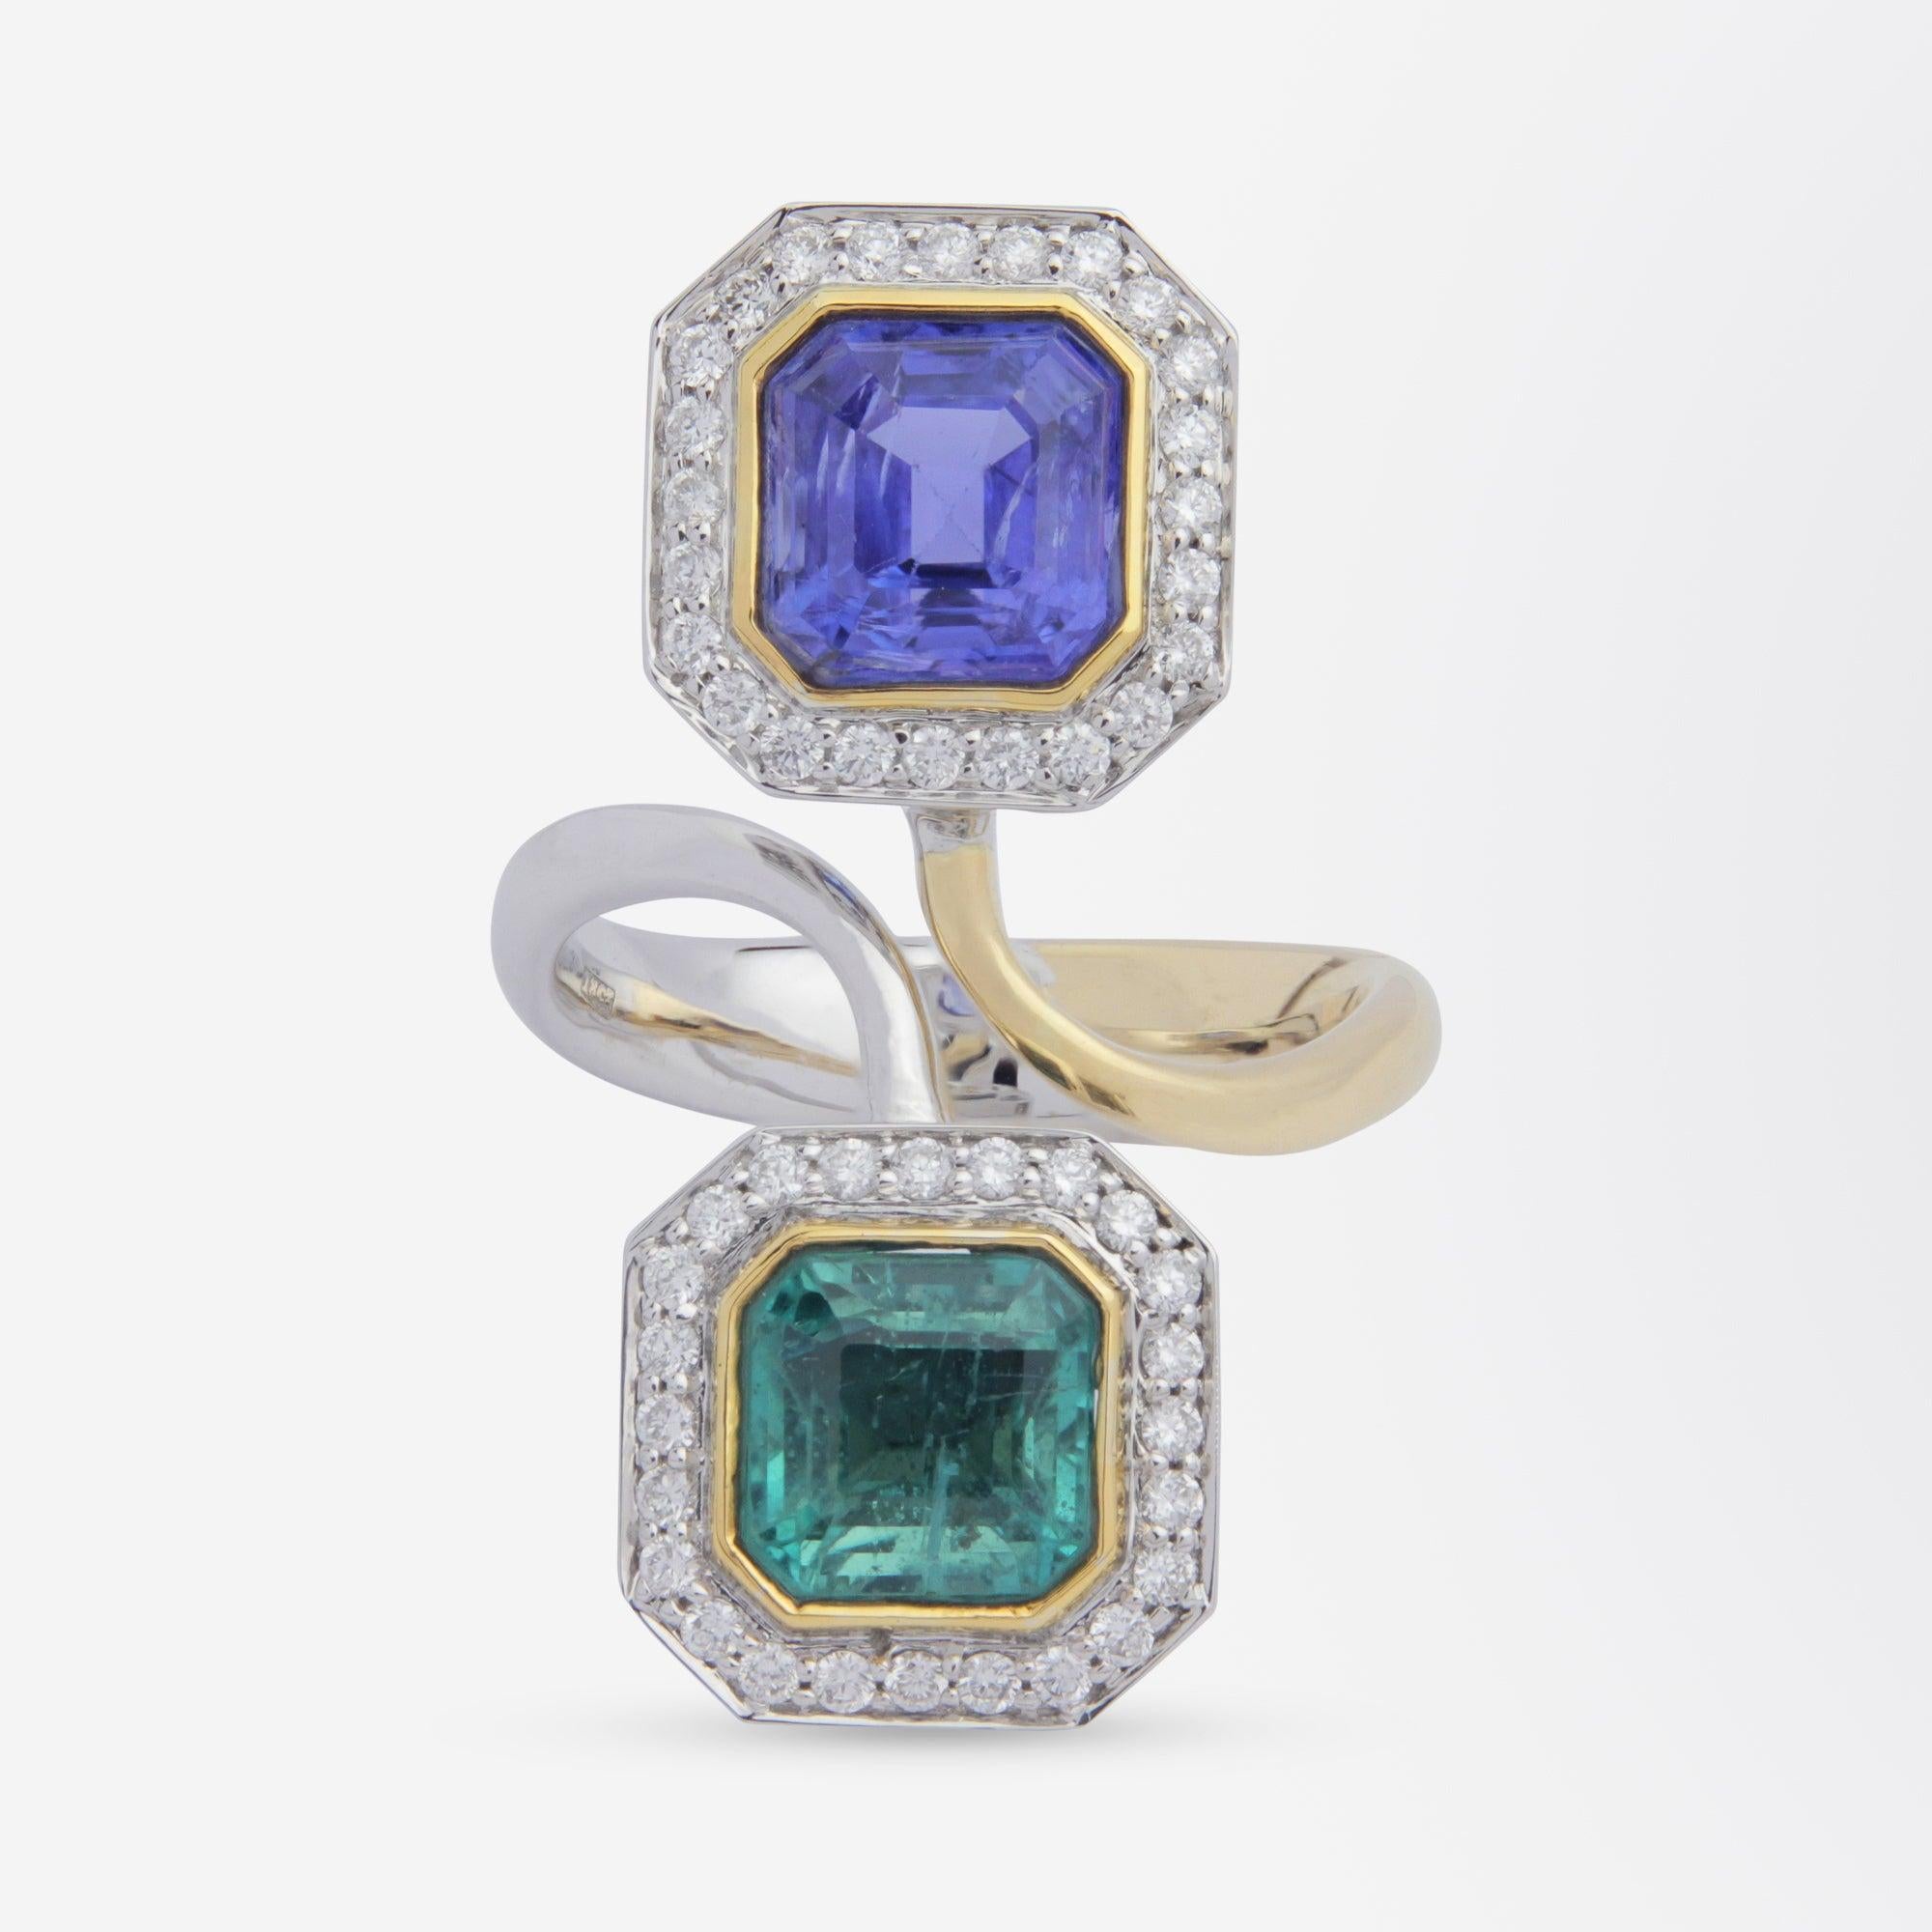 A contemporary, handmade, 'toi et moi' ring crafted from two tone 18 karat white gold and set with diamonds, an emerald and a tanzanite. The 50 stone ring features a rub over set emerald and a rub over set tanzanite which are each surrounded by 24